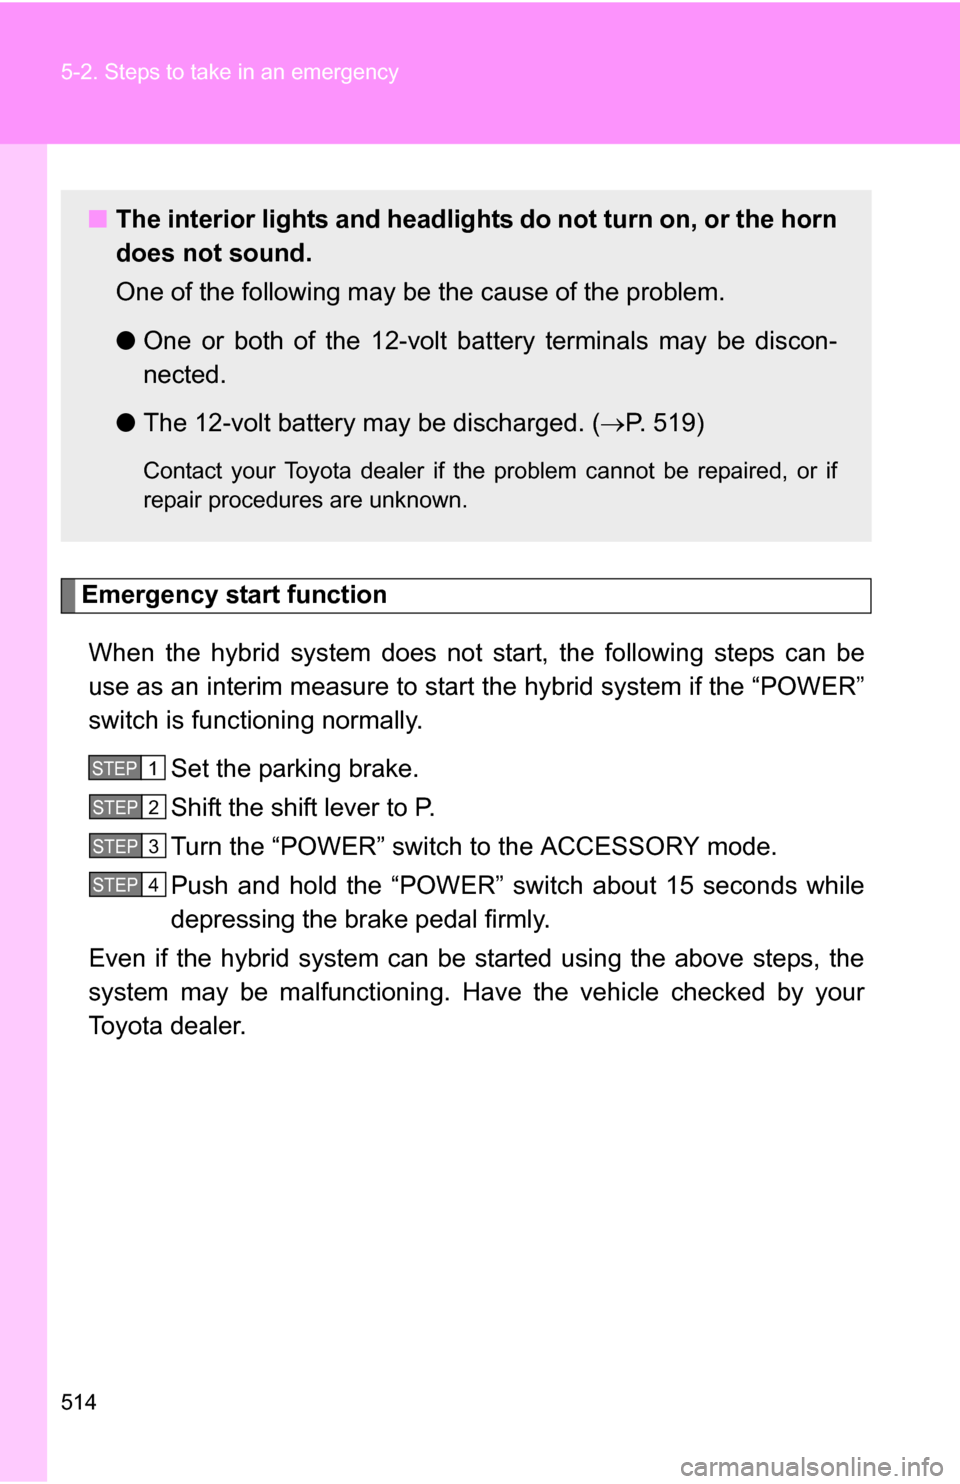 TOYOTA HIGHLANDER HYBRID 2008 XU40 / 2.G Owners Manual 514 5-2. Steps to take in an emergency
Emergency start functionWhen the hybrid system does not start, the following steps can be
use as an interim measure to start  the hybrid system if the “POWER�